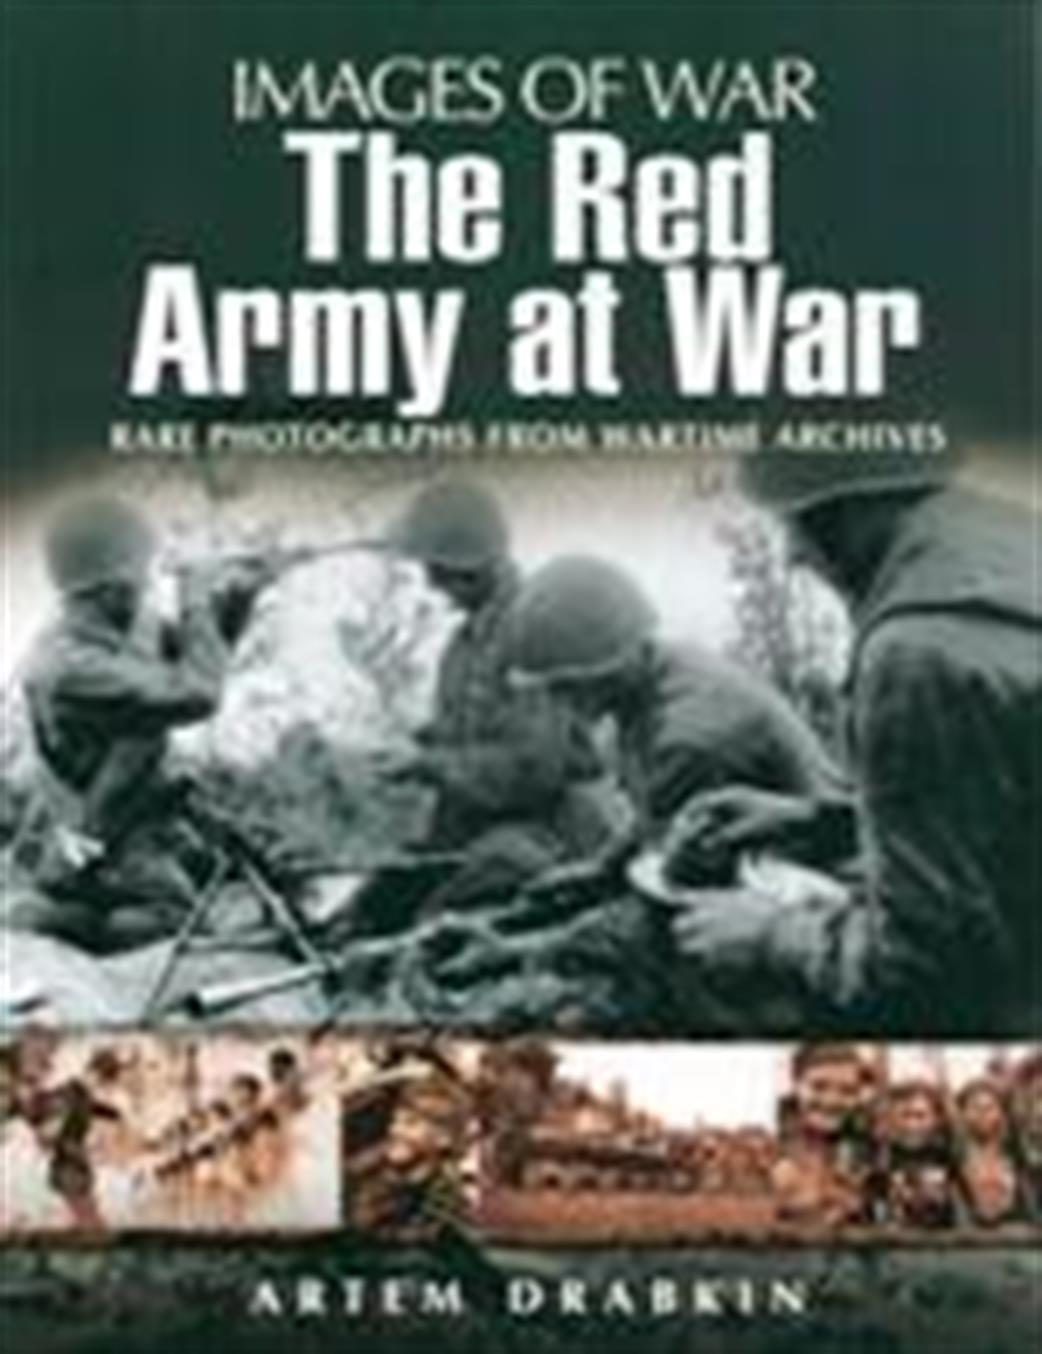 Pen & Sword 9781848840553 Images Of War Red Army At War by Artem Drabkin